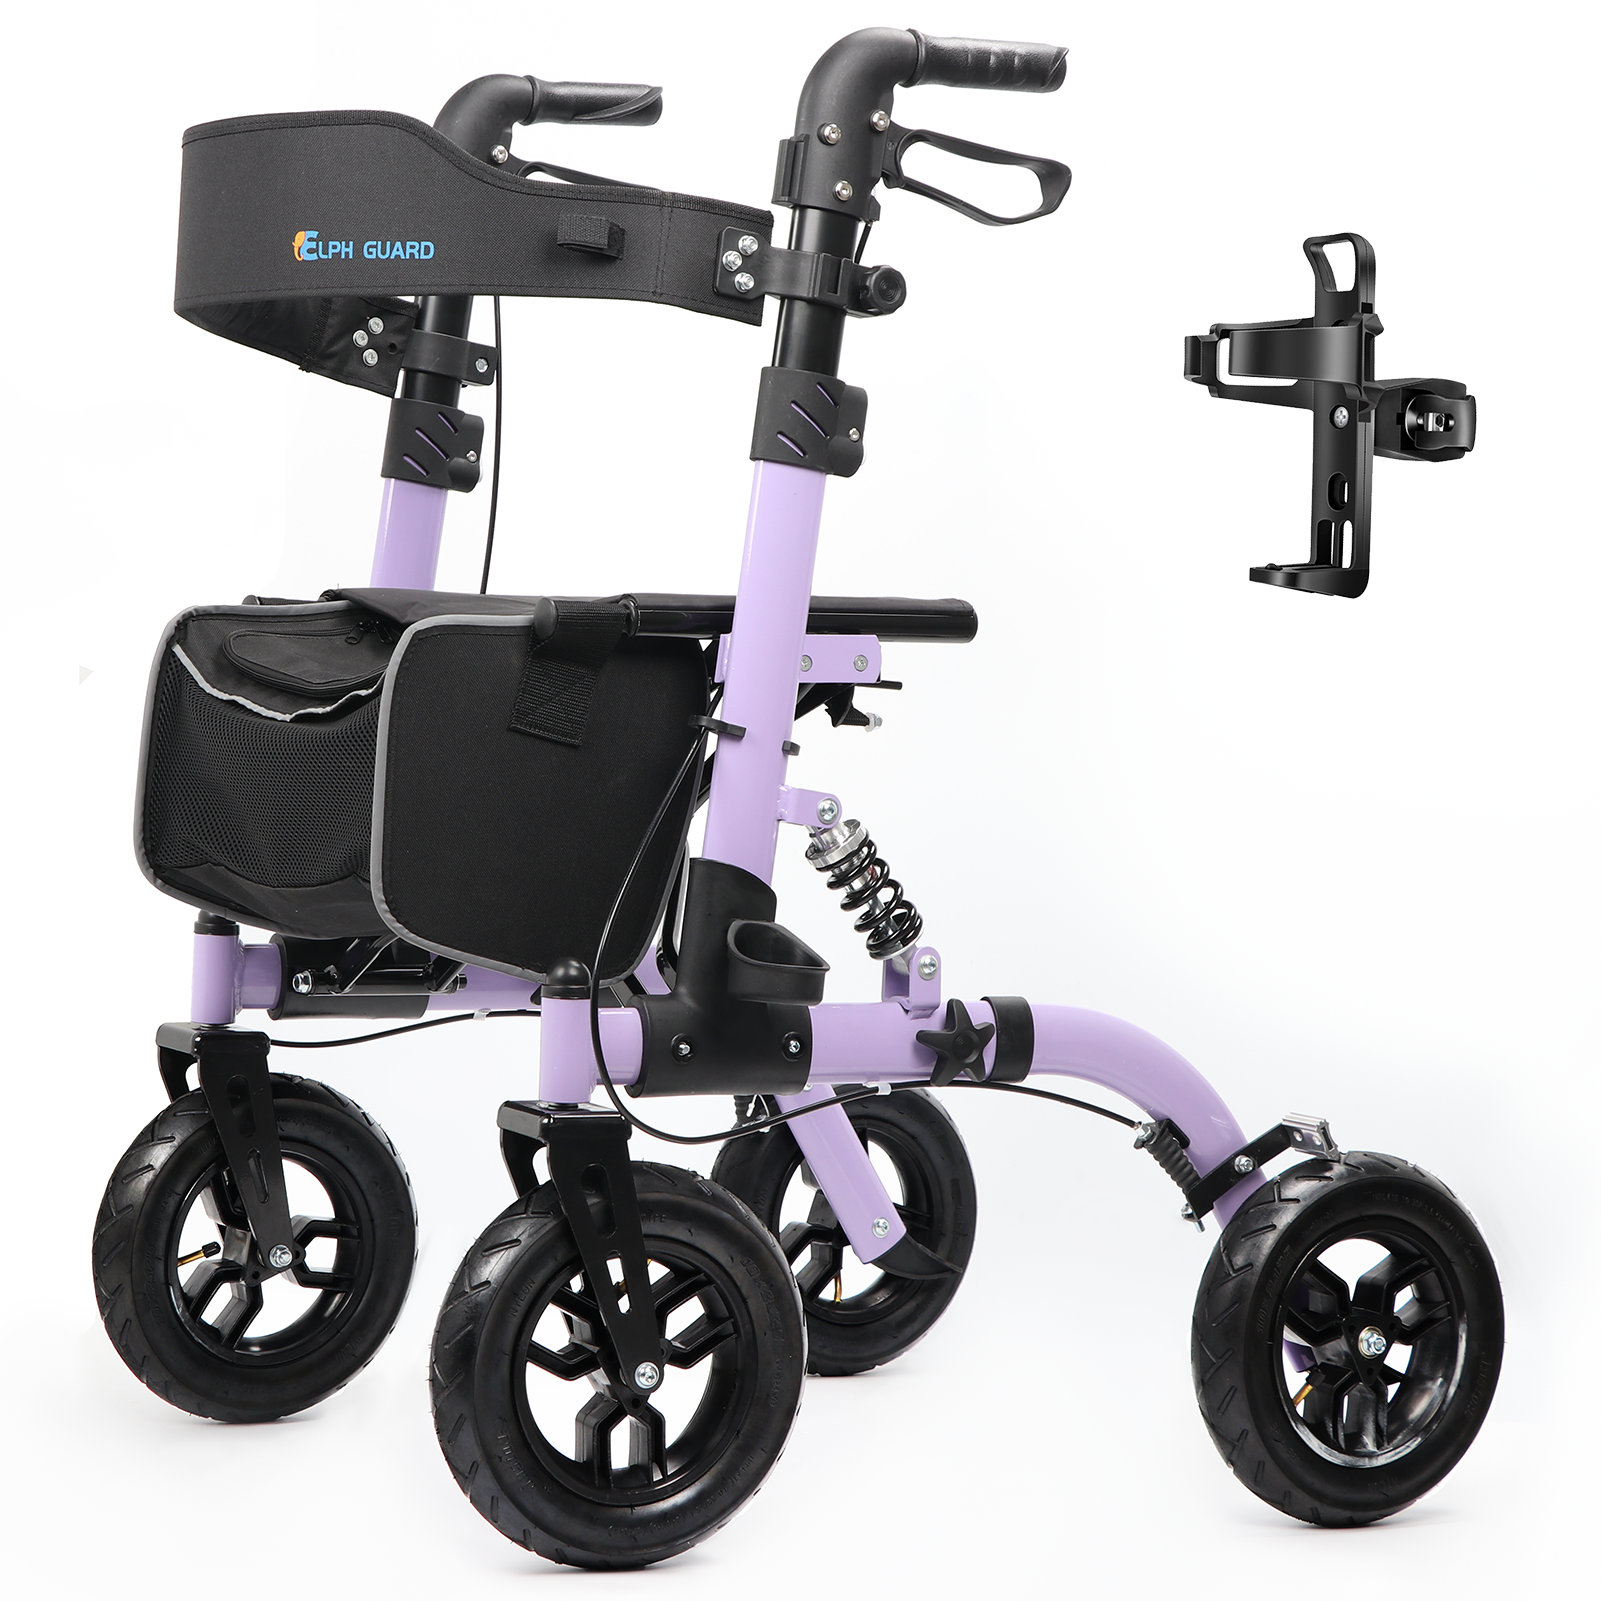 ELPH GUARD All Terrain Rollator with 10" Rubber Wheels, Support to 350 Pounds